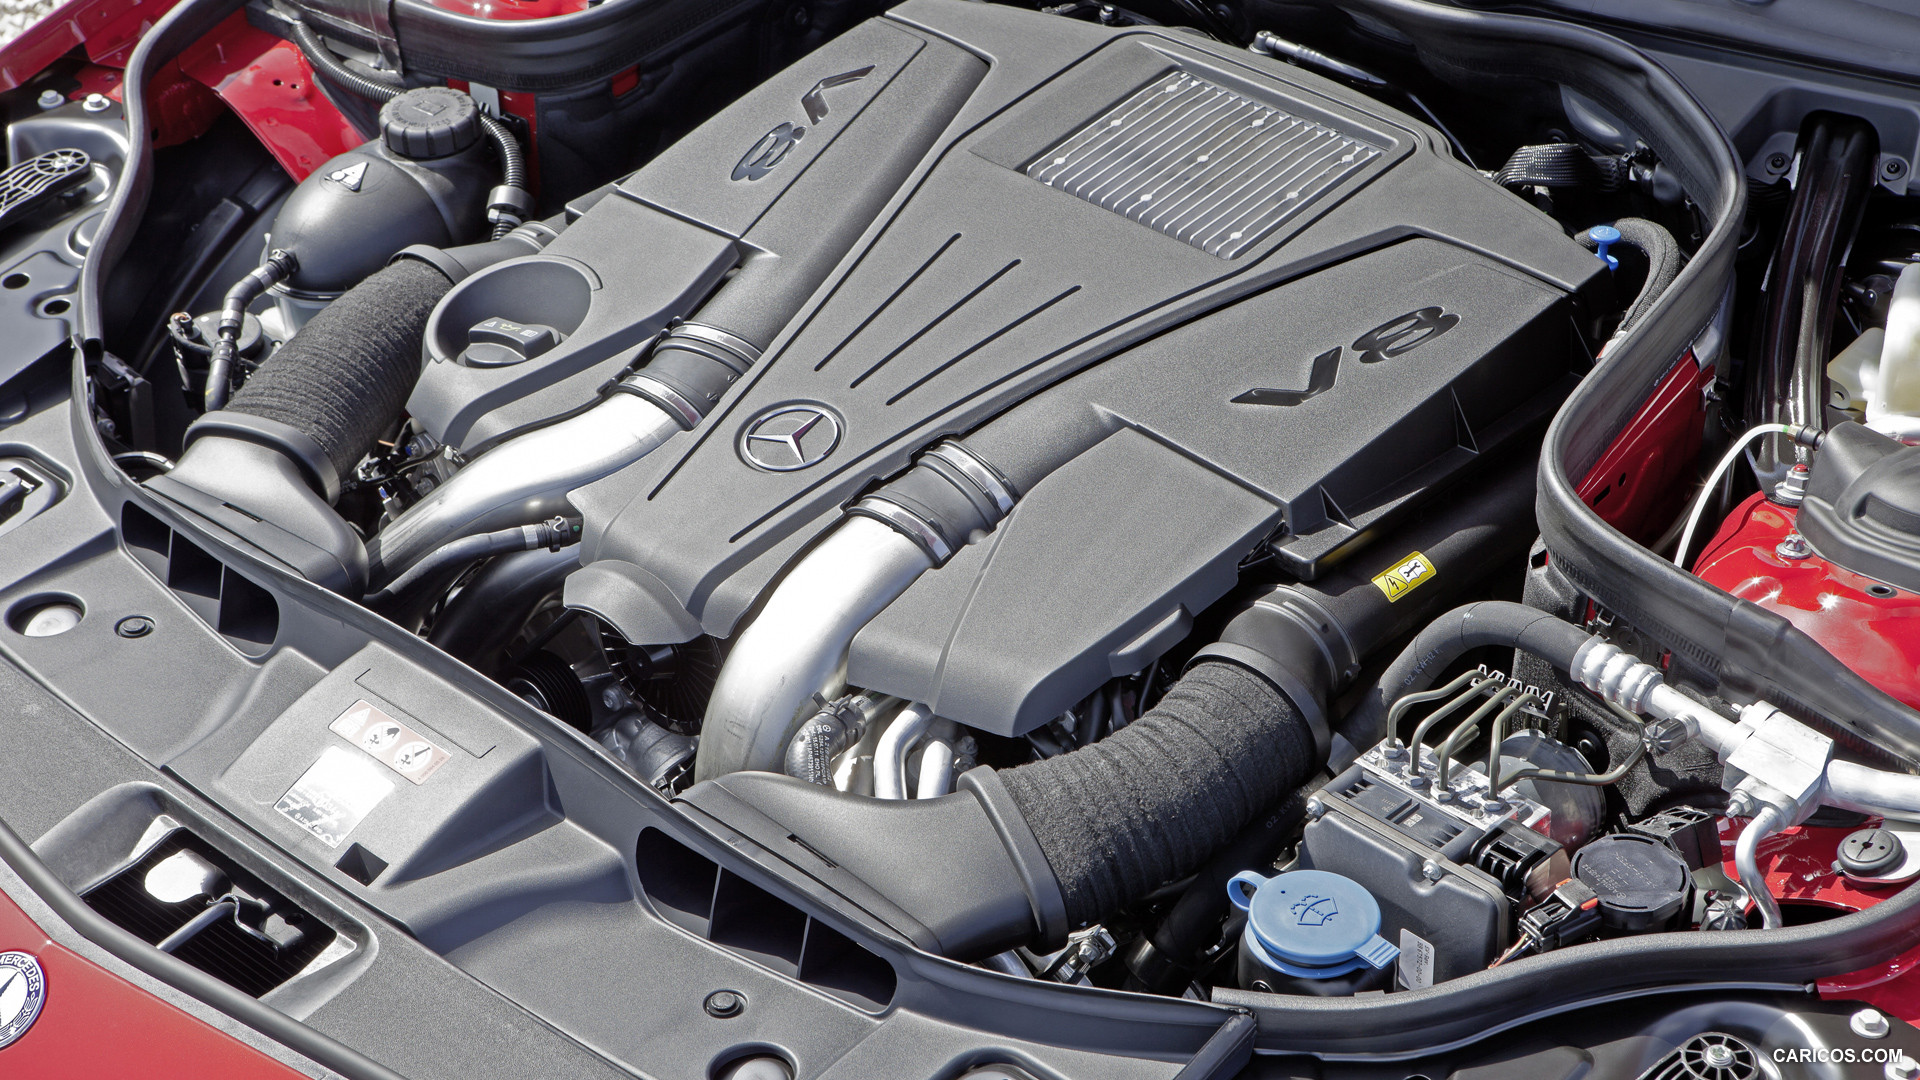 2013 Mercedes-Benz CLS 500 4MATIC Shooting Brake - Engine, #28 of 184